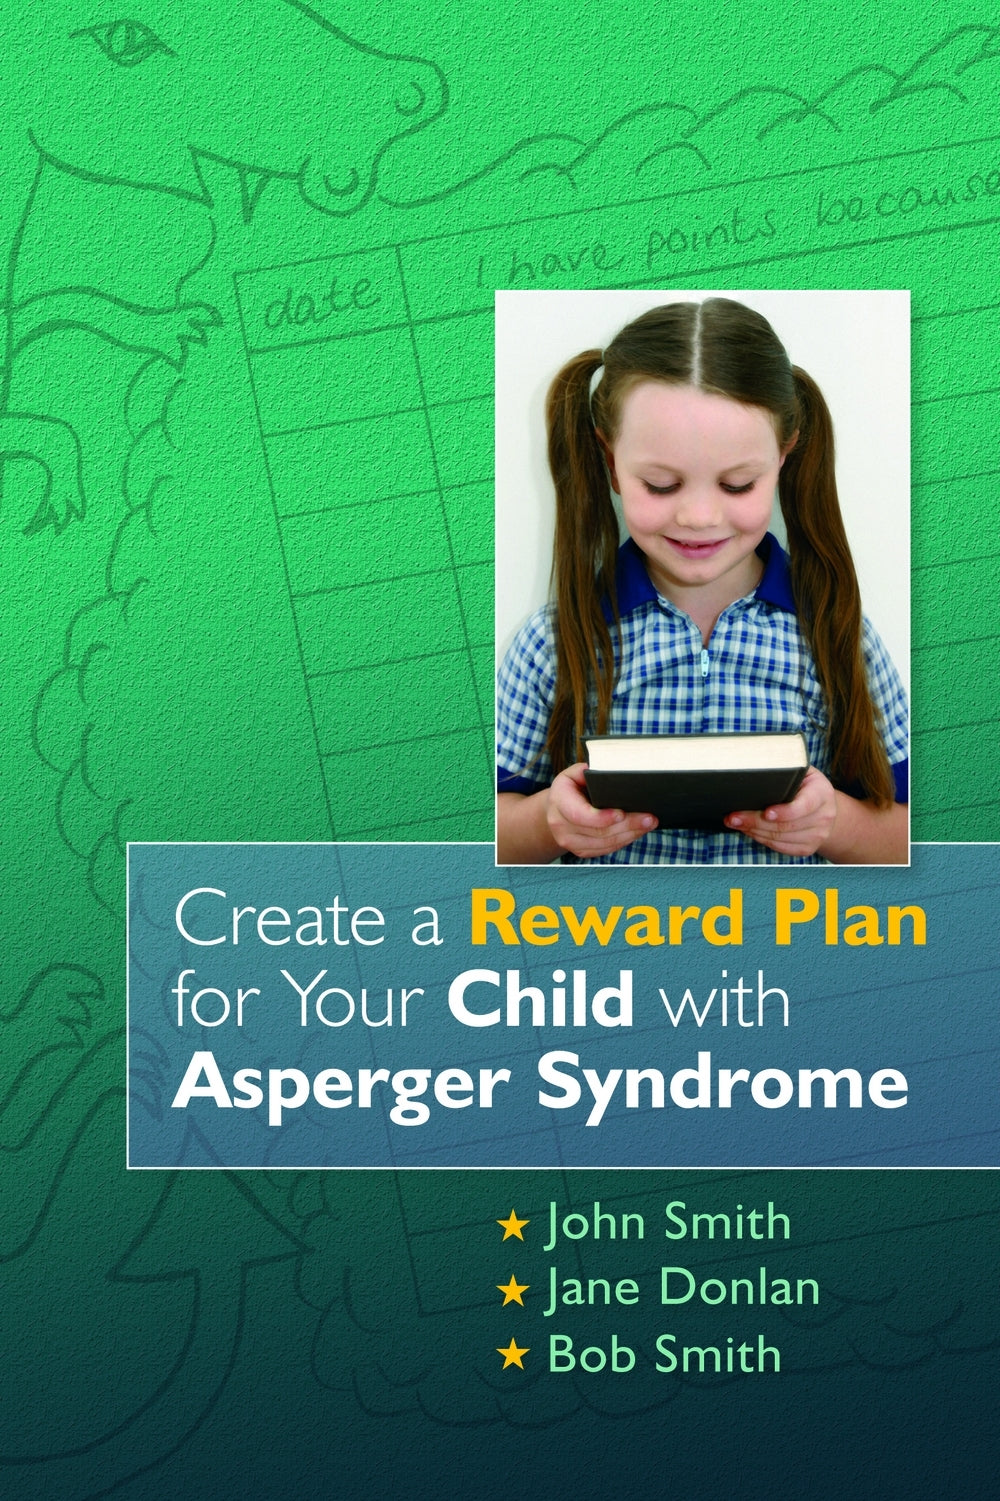 Create a Reward Plan for your Child with Asperger Syndrome by Jane Donlan, John Smith, Bob Smith